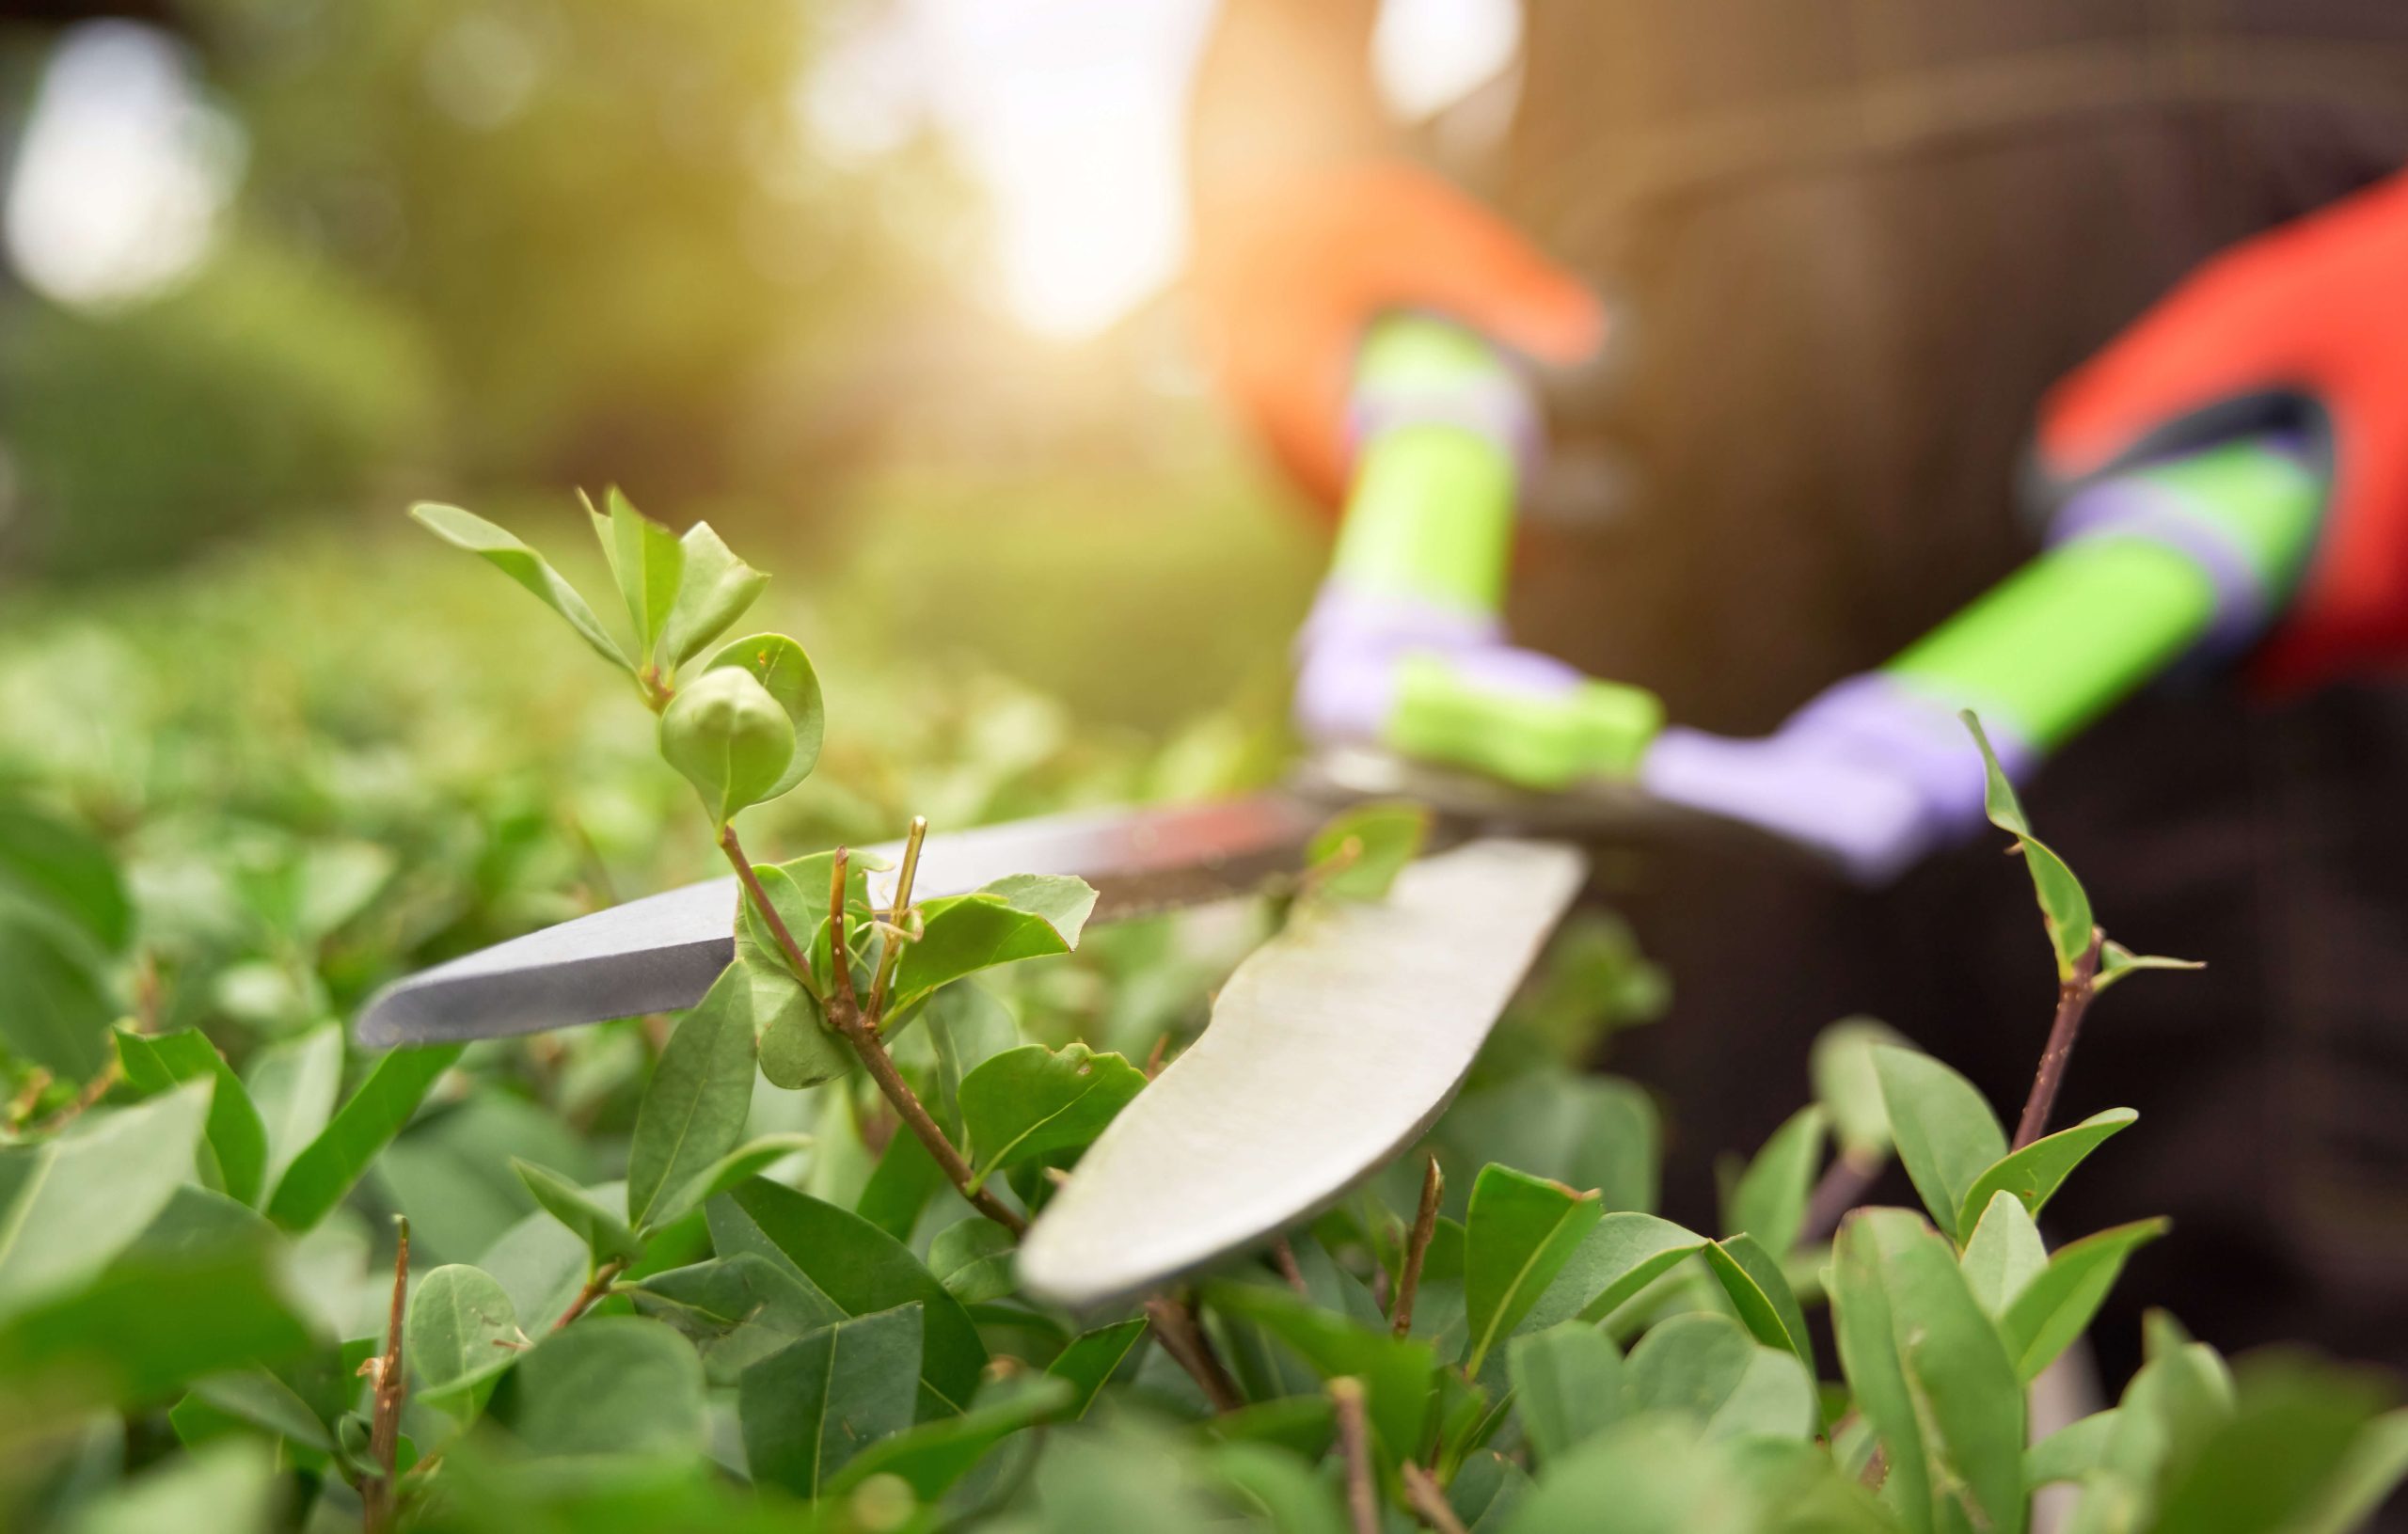 A close-up of a landscaping professional trimming a bush